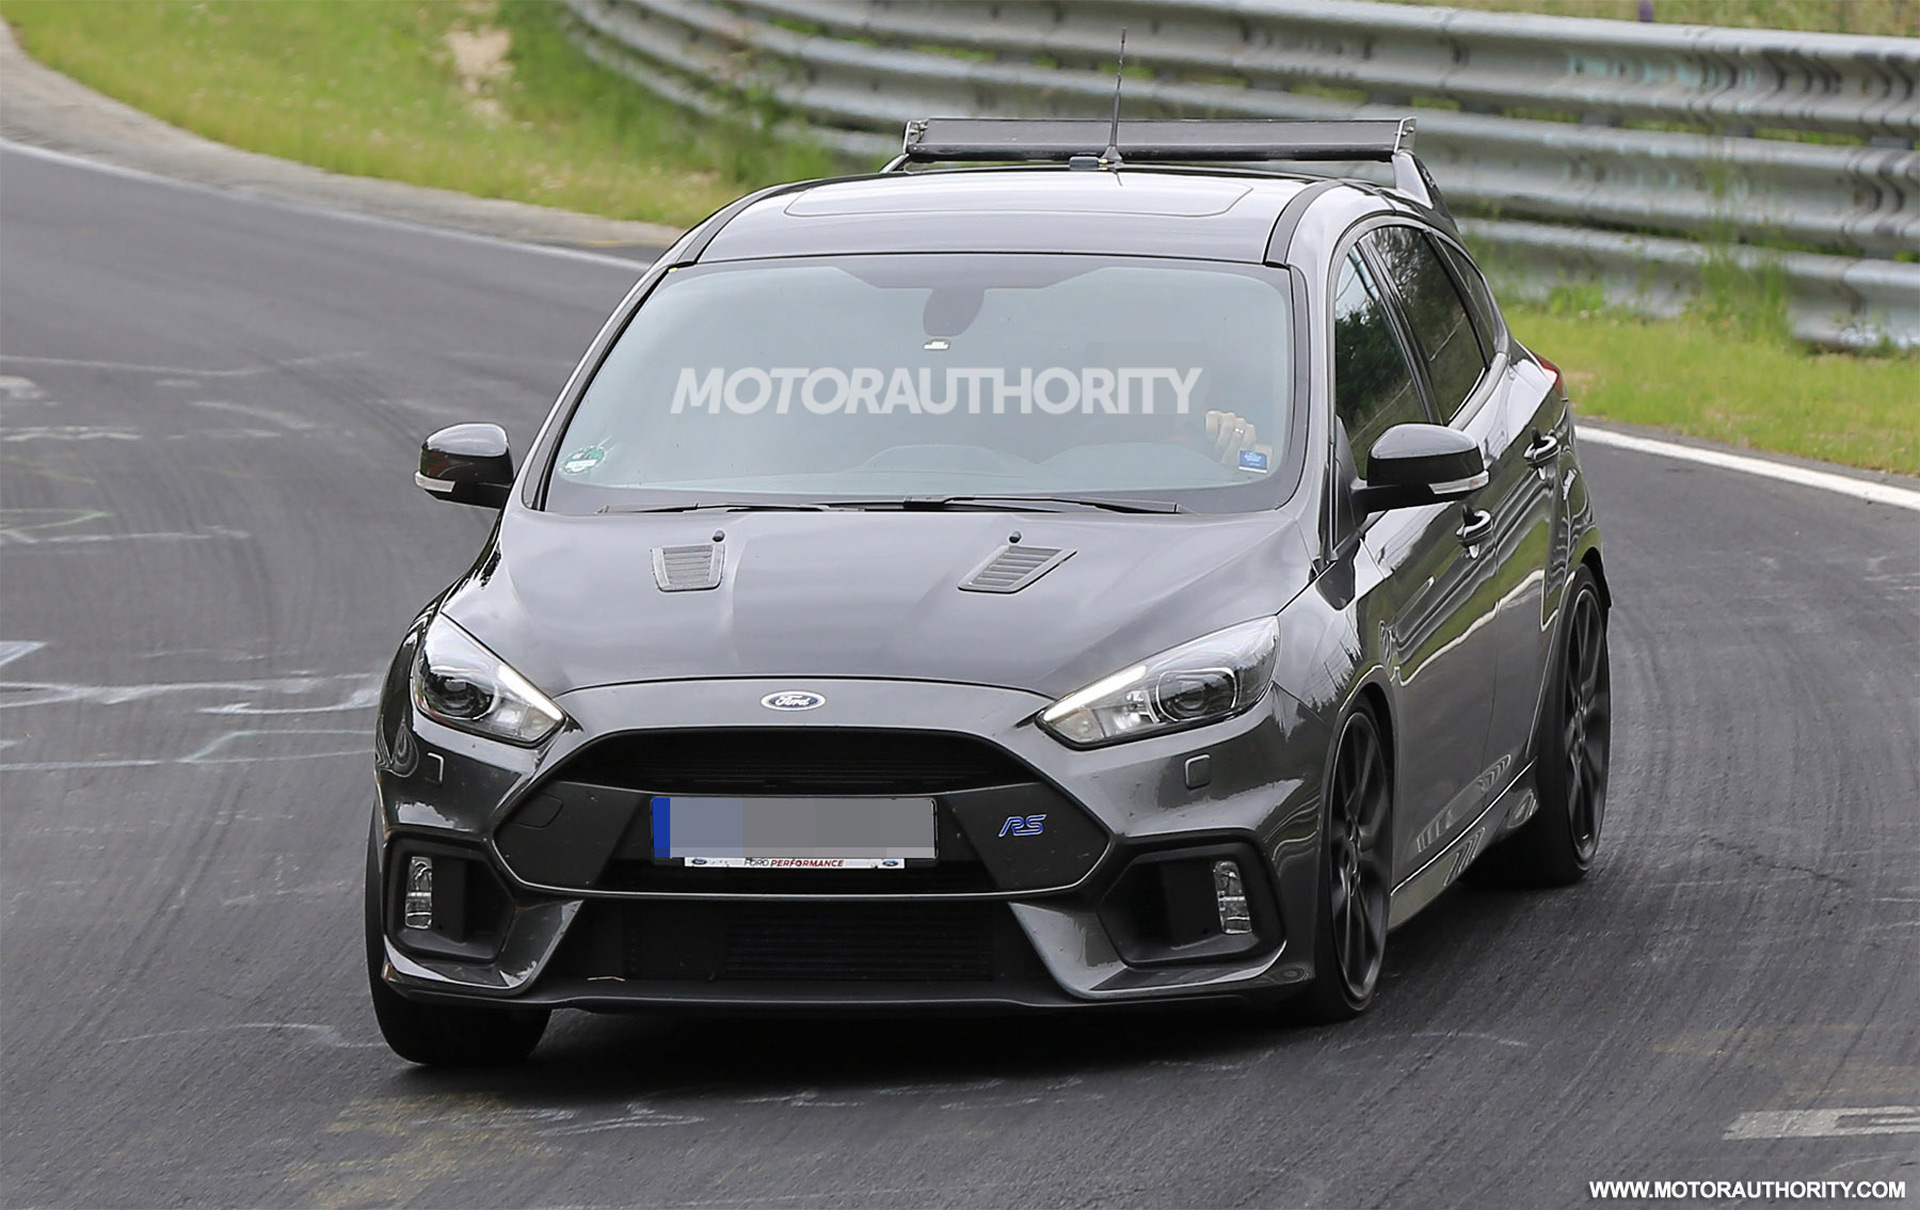 More details on the Ford Focus RS500